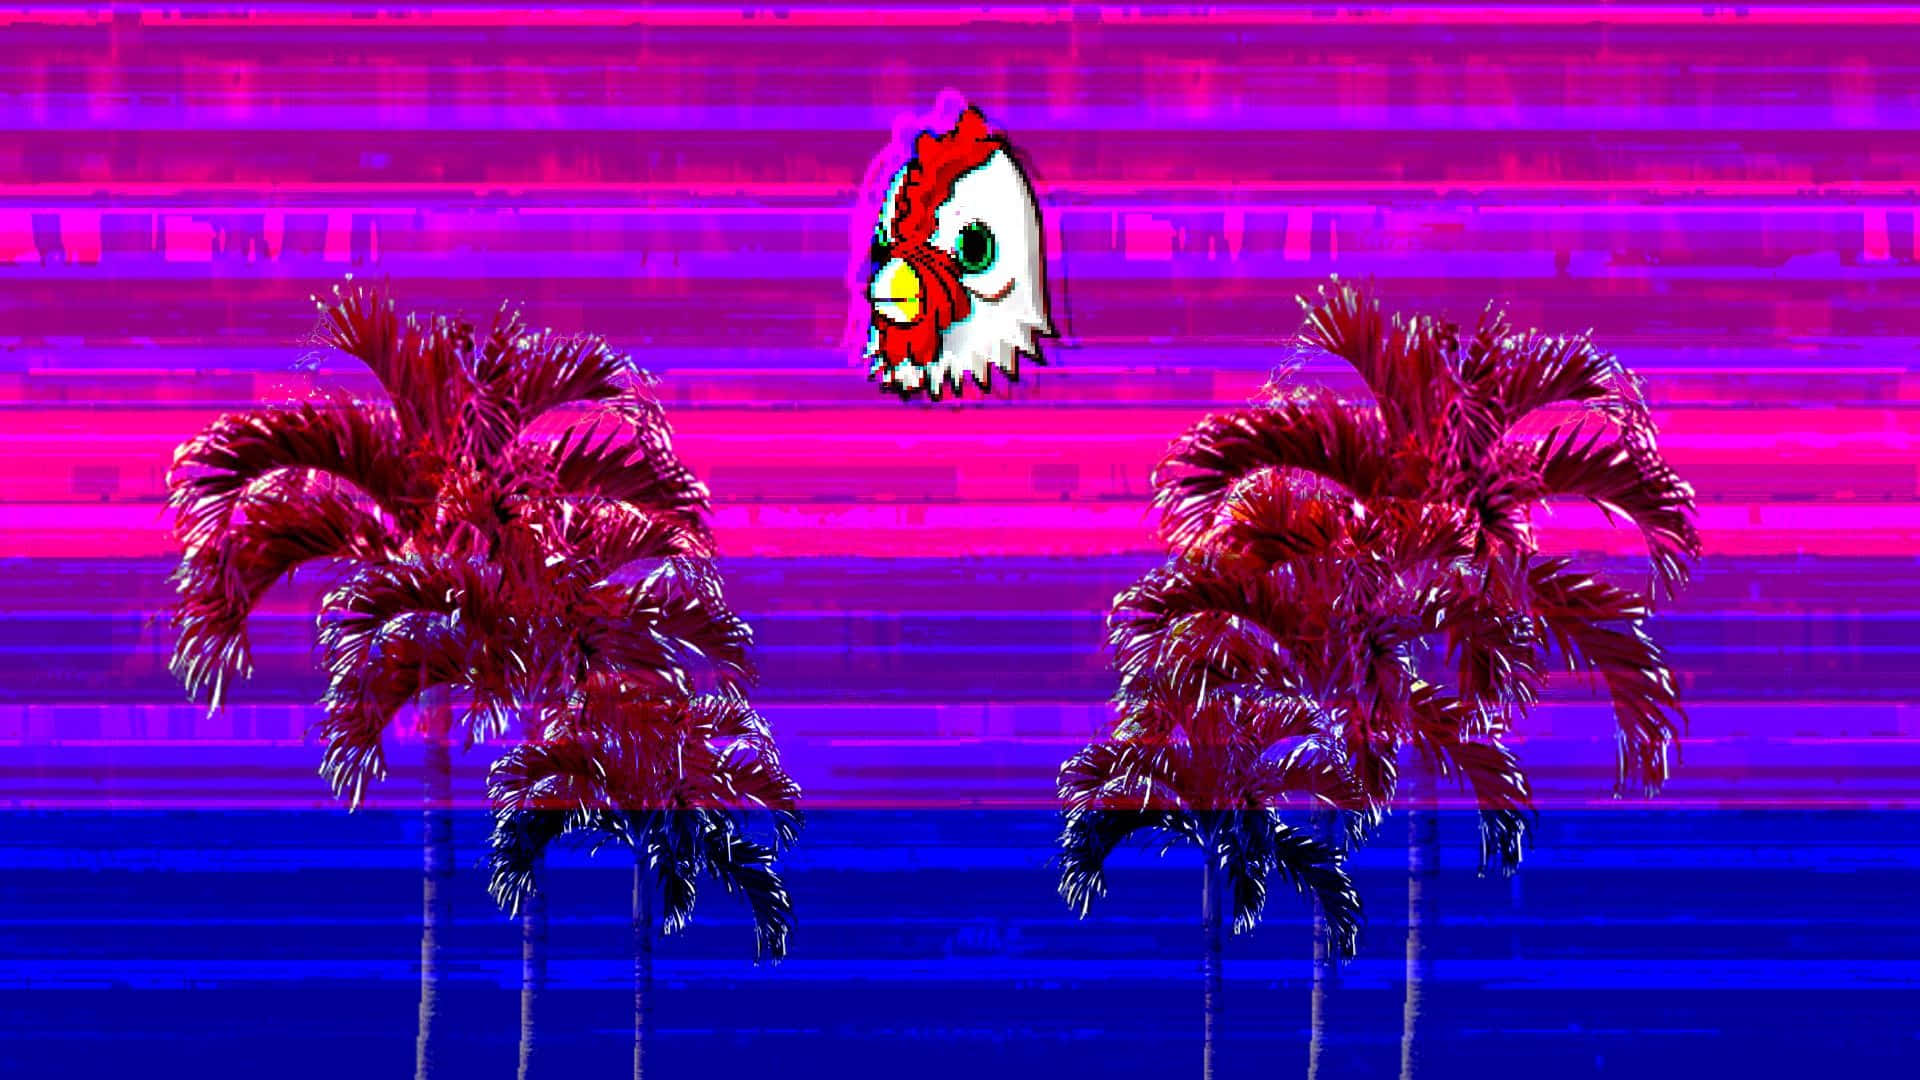 Action-packed 1980s-style Hotline Miami Artwork